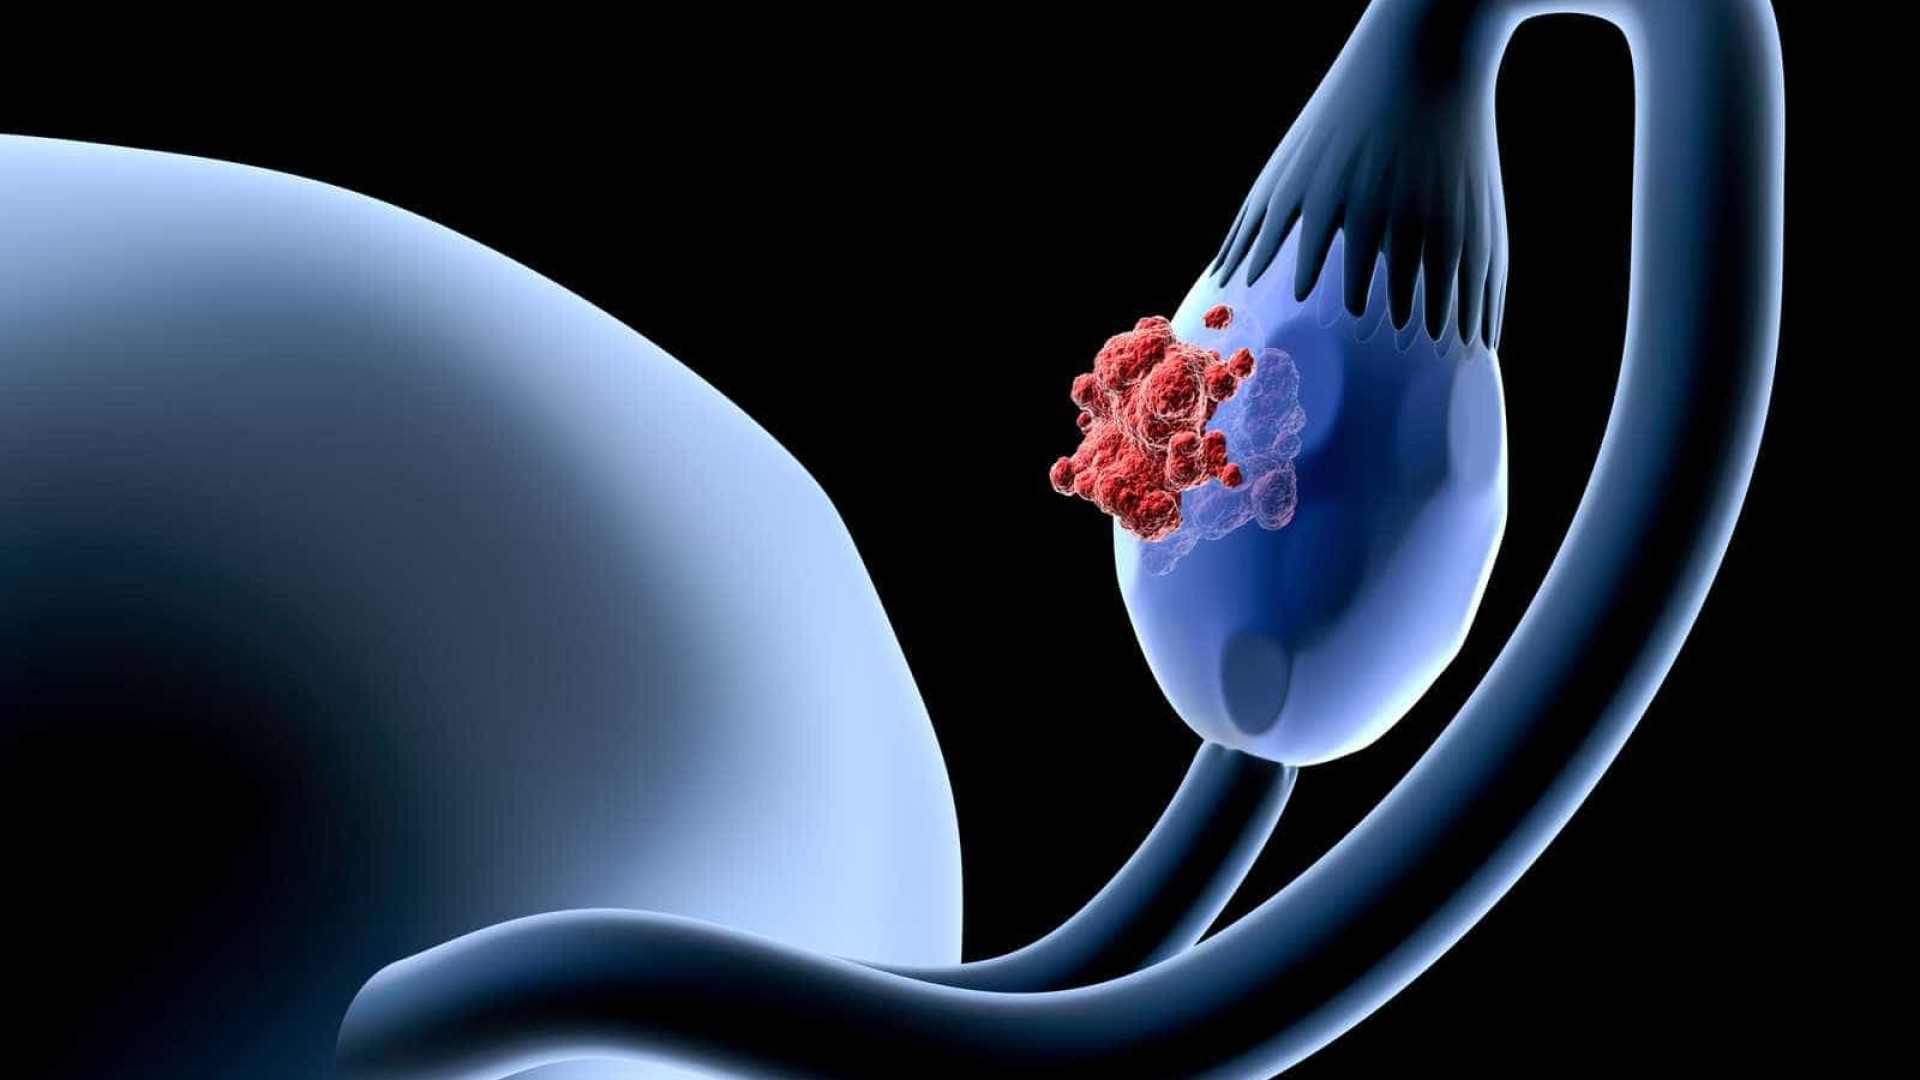 You should not ignore the early and painful signs of ovarian cancer